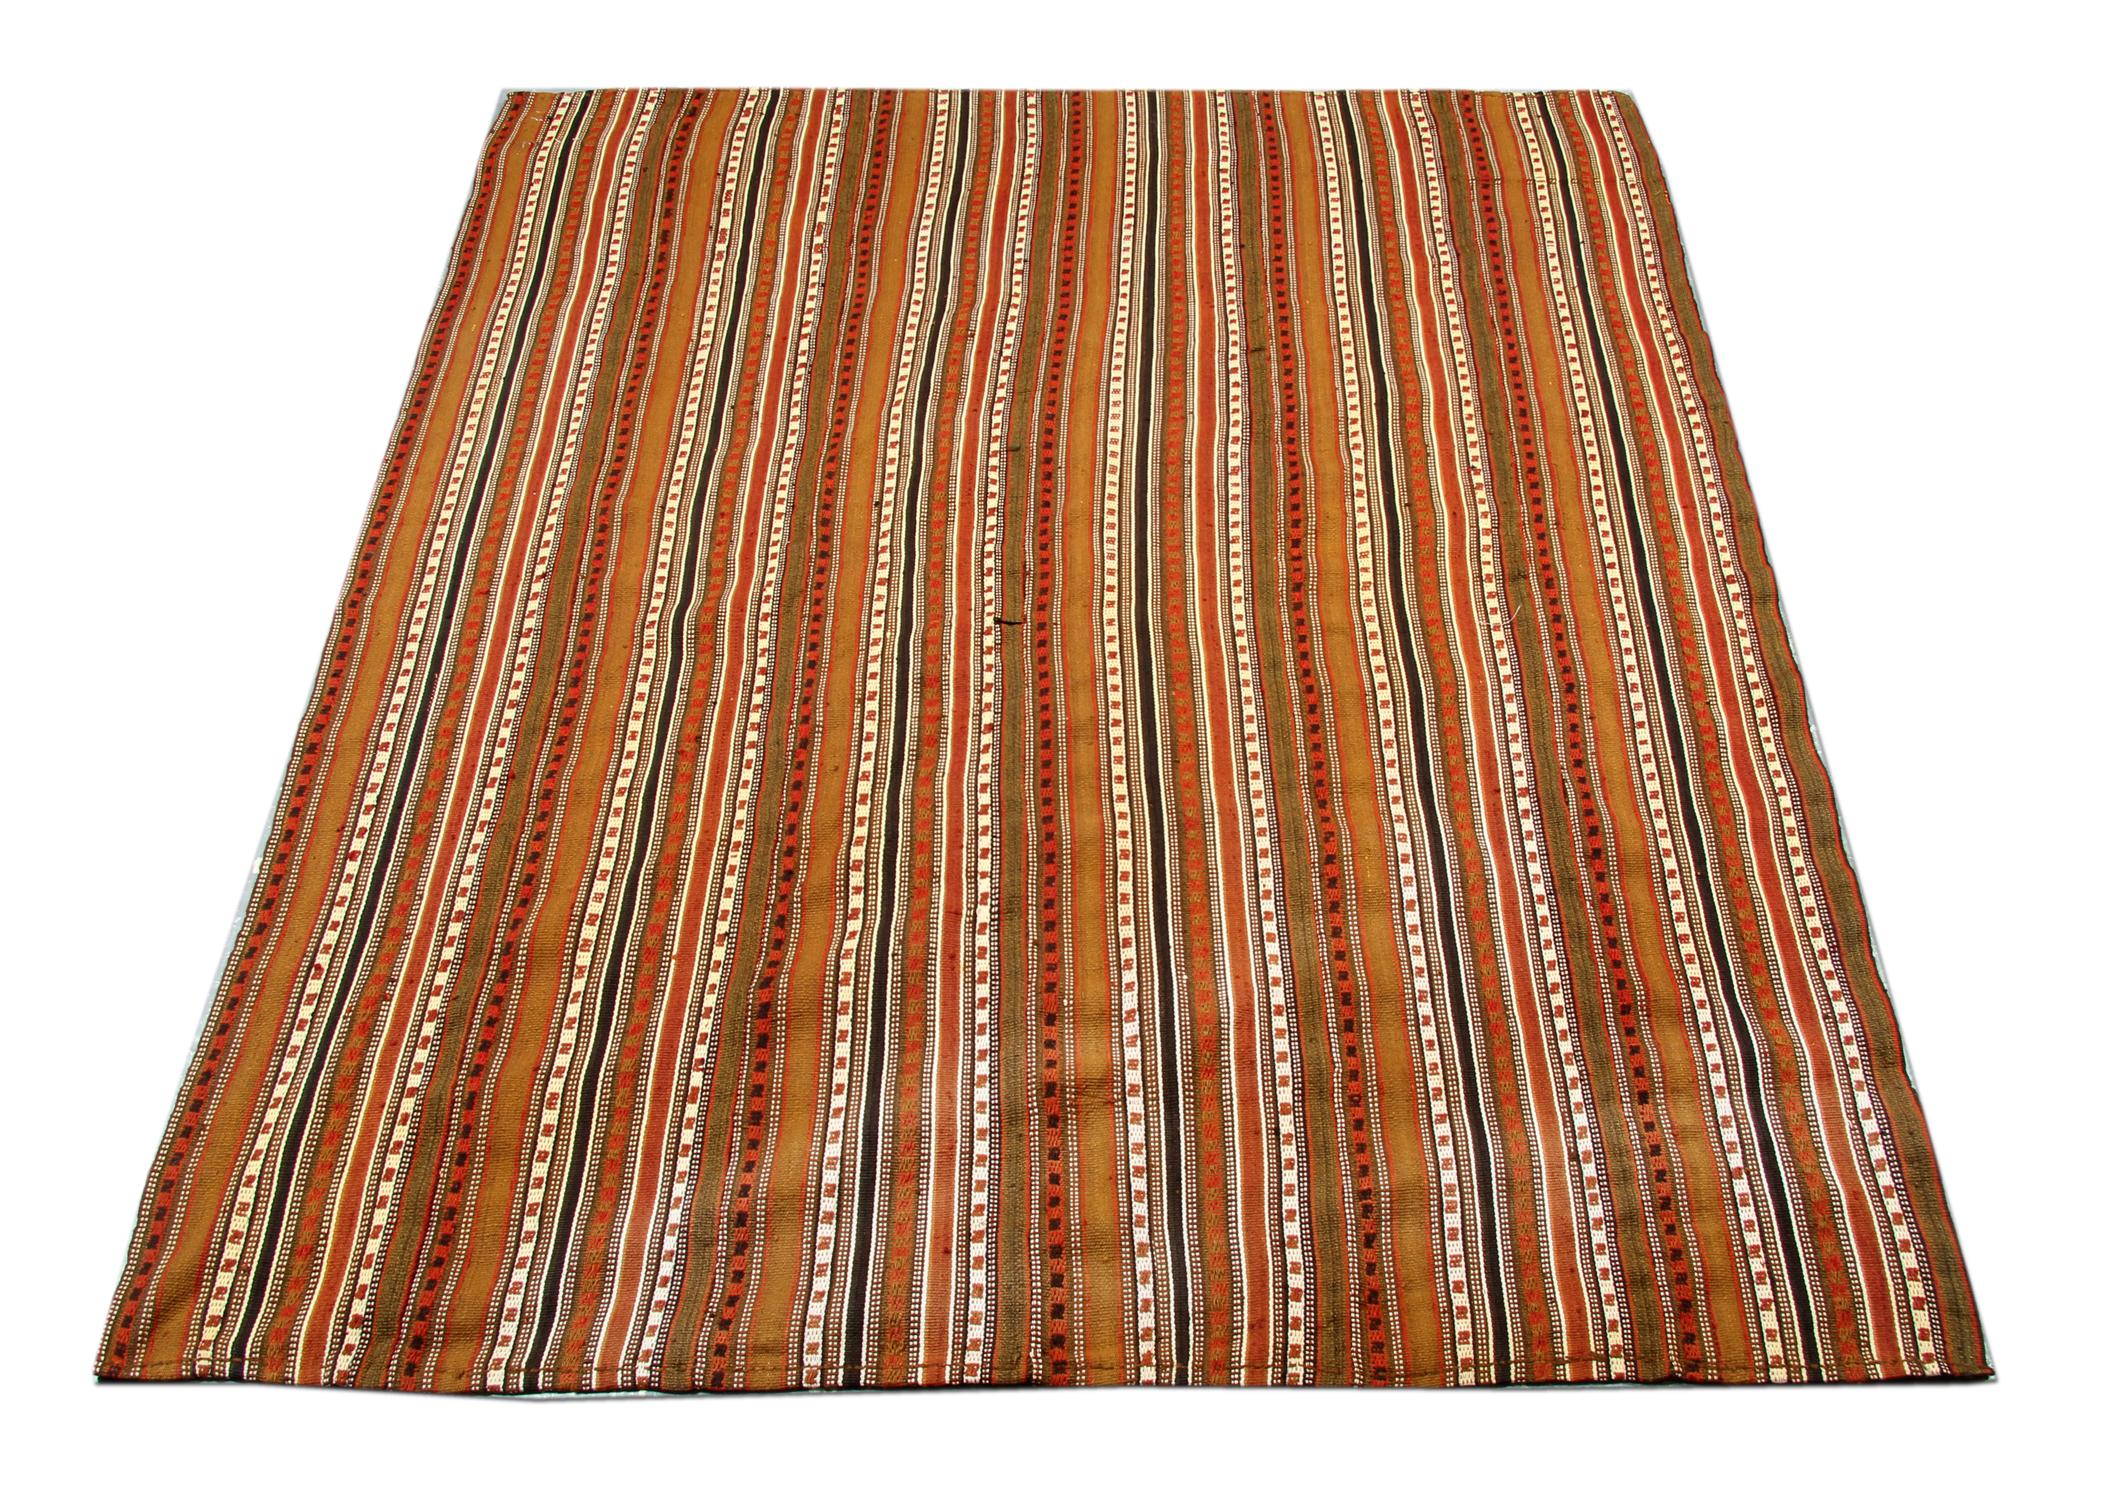 Rust-orange, brown, red and ivory make up the main colors in this elegant wool Jajim. Wove by hand with a stripe geometric design. Both the color and pattern make this piece easy to style in any home interior.
Constructed with fine, hand-spun wool